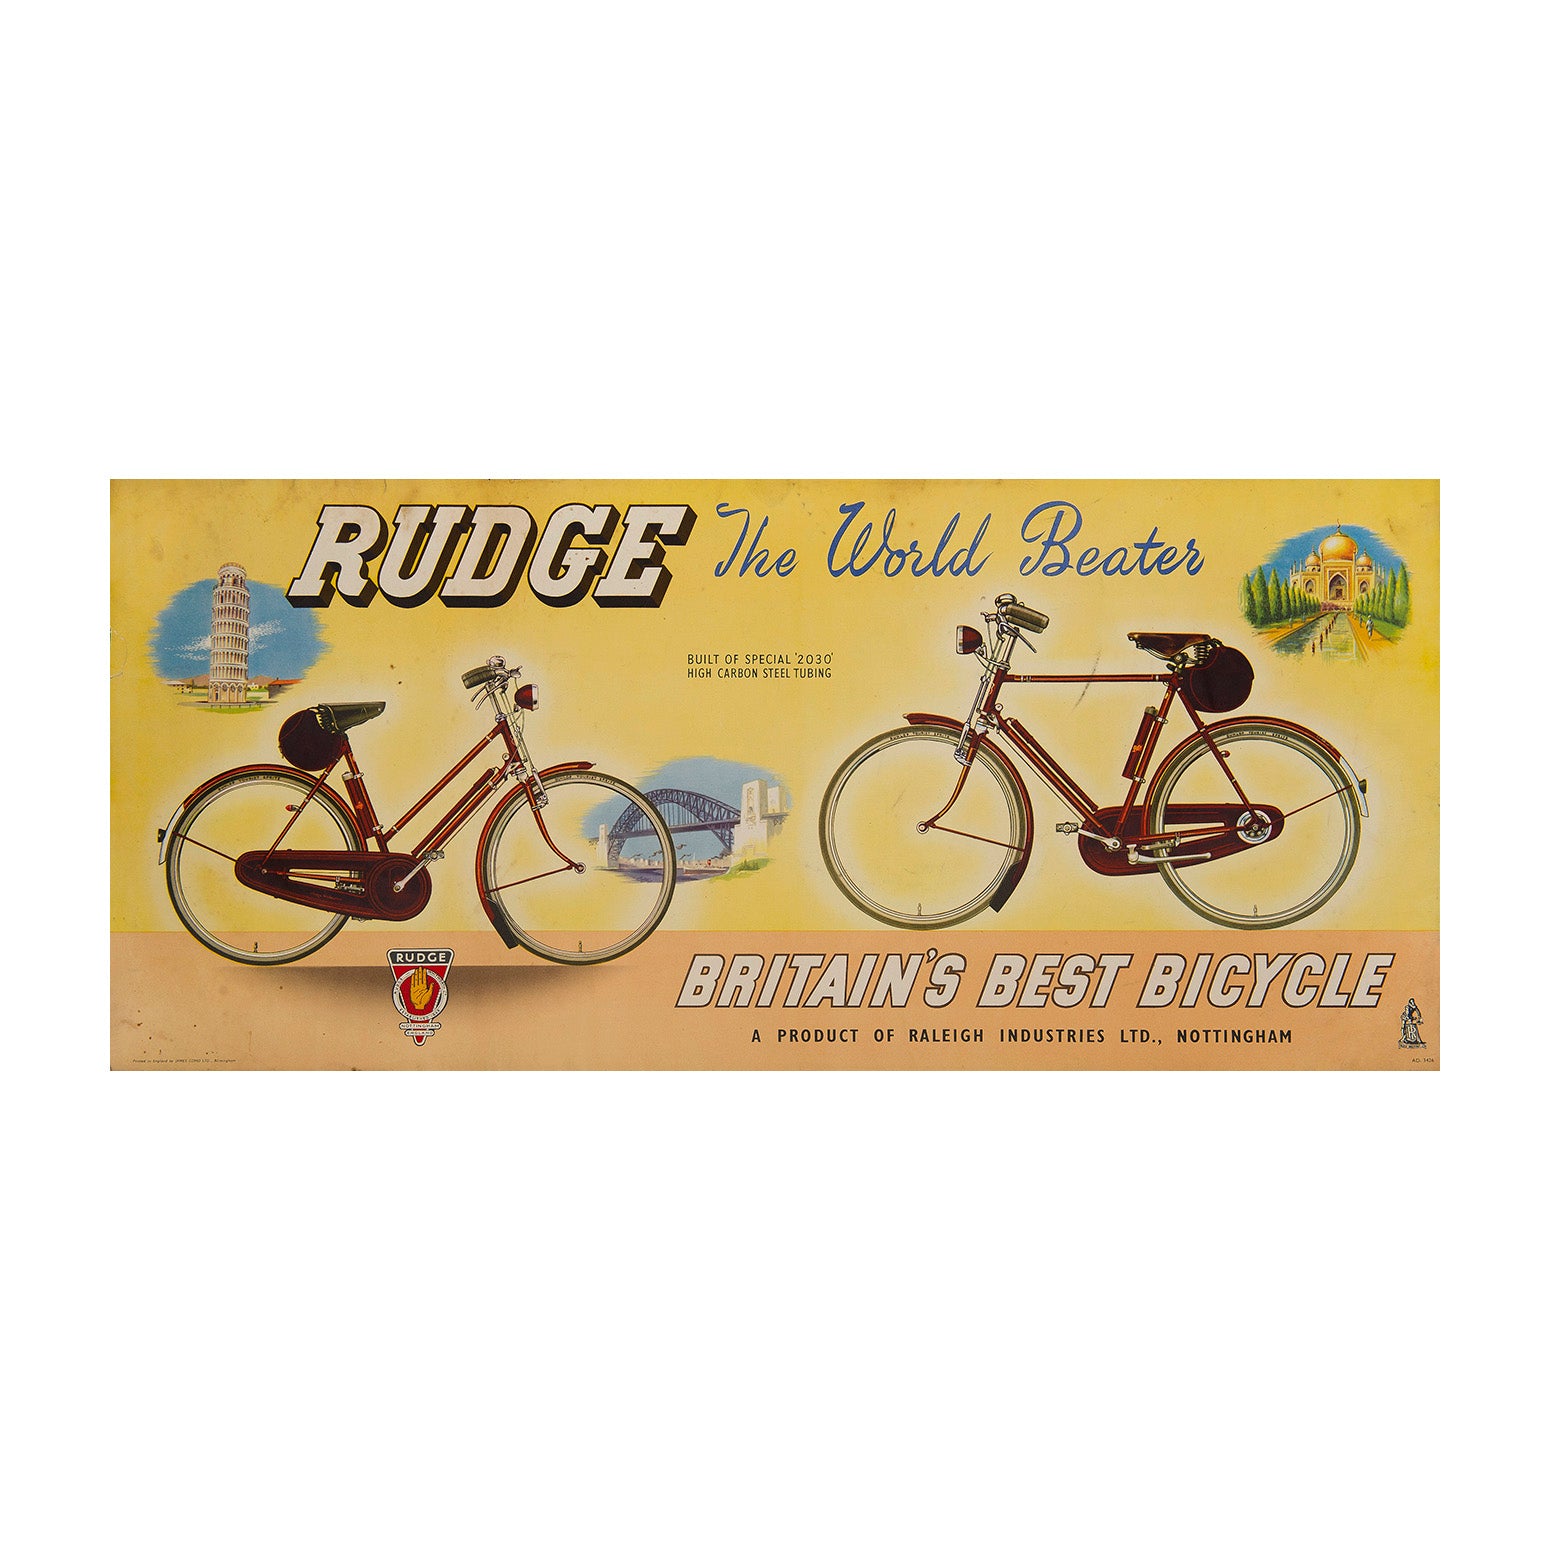 Rudge. The World beater